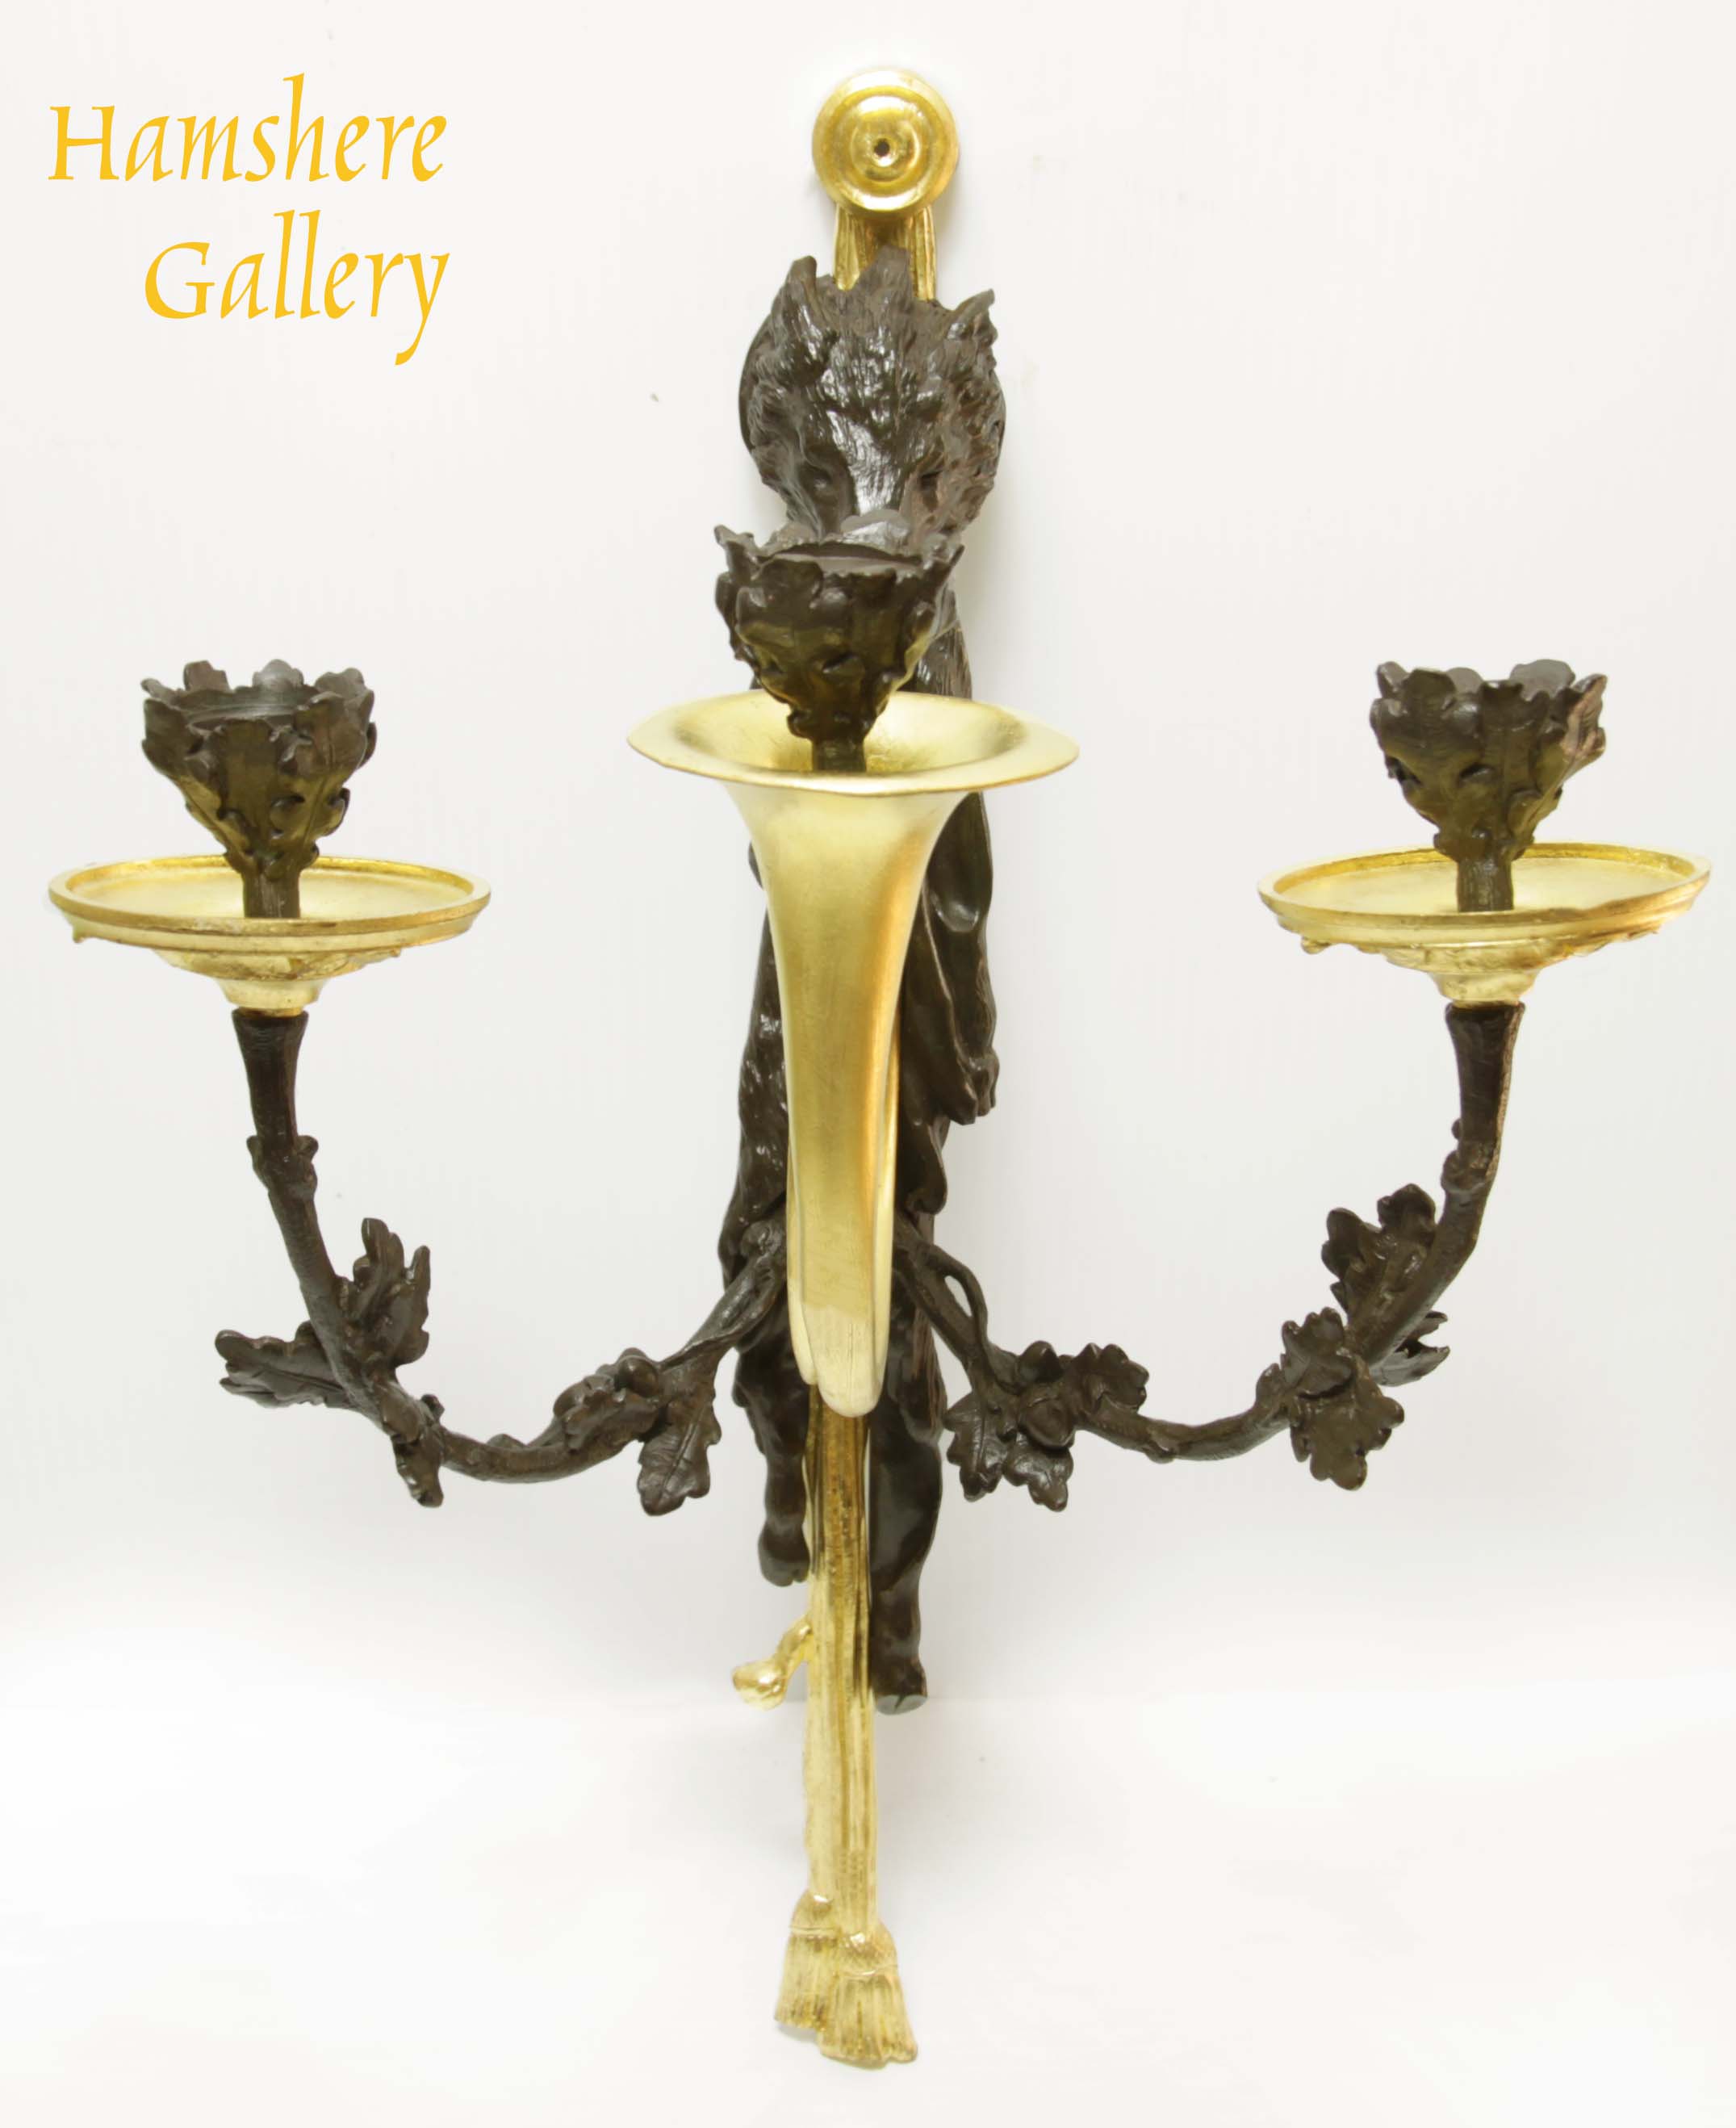 Click to see full size: 19th century, French bronze dorÃ© hunting / â€˜chasseâ€™ boar French horn wall sconces â€˜appliquesâ€™- 19th century, French bronze dorÃ© hunting / â€˜chasseâ€™ boar French horn wall sconces â€˜appliquesâ€™